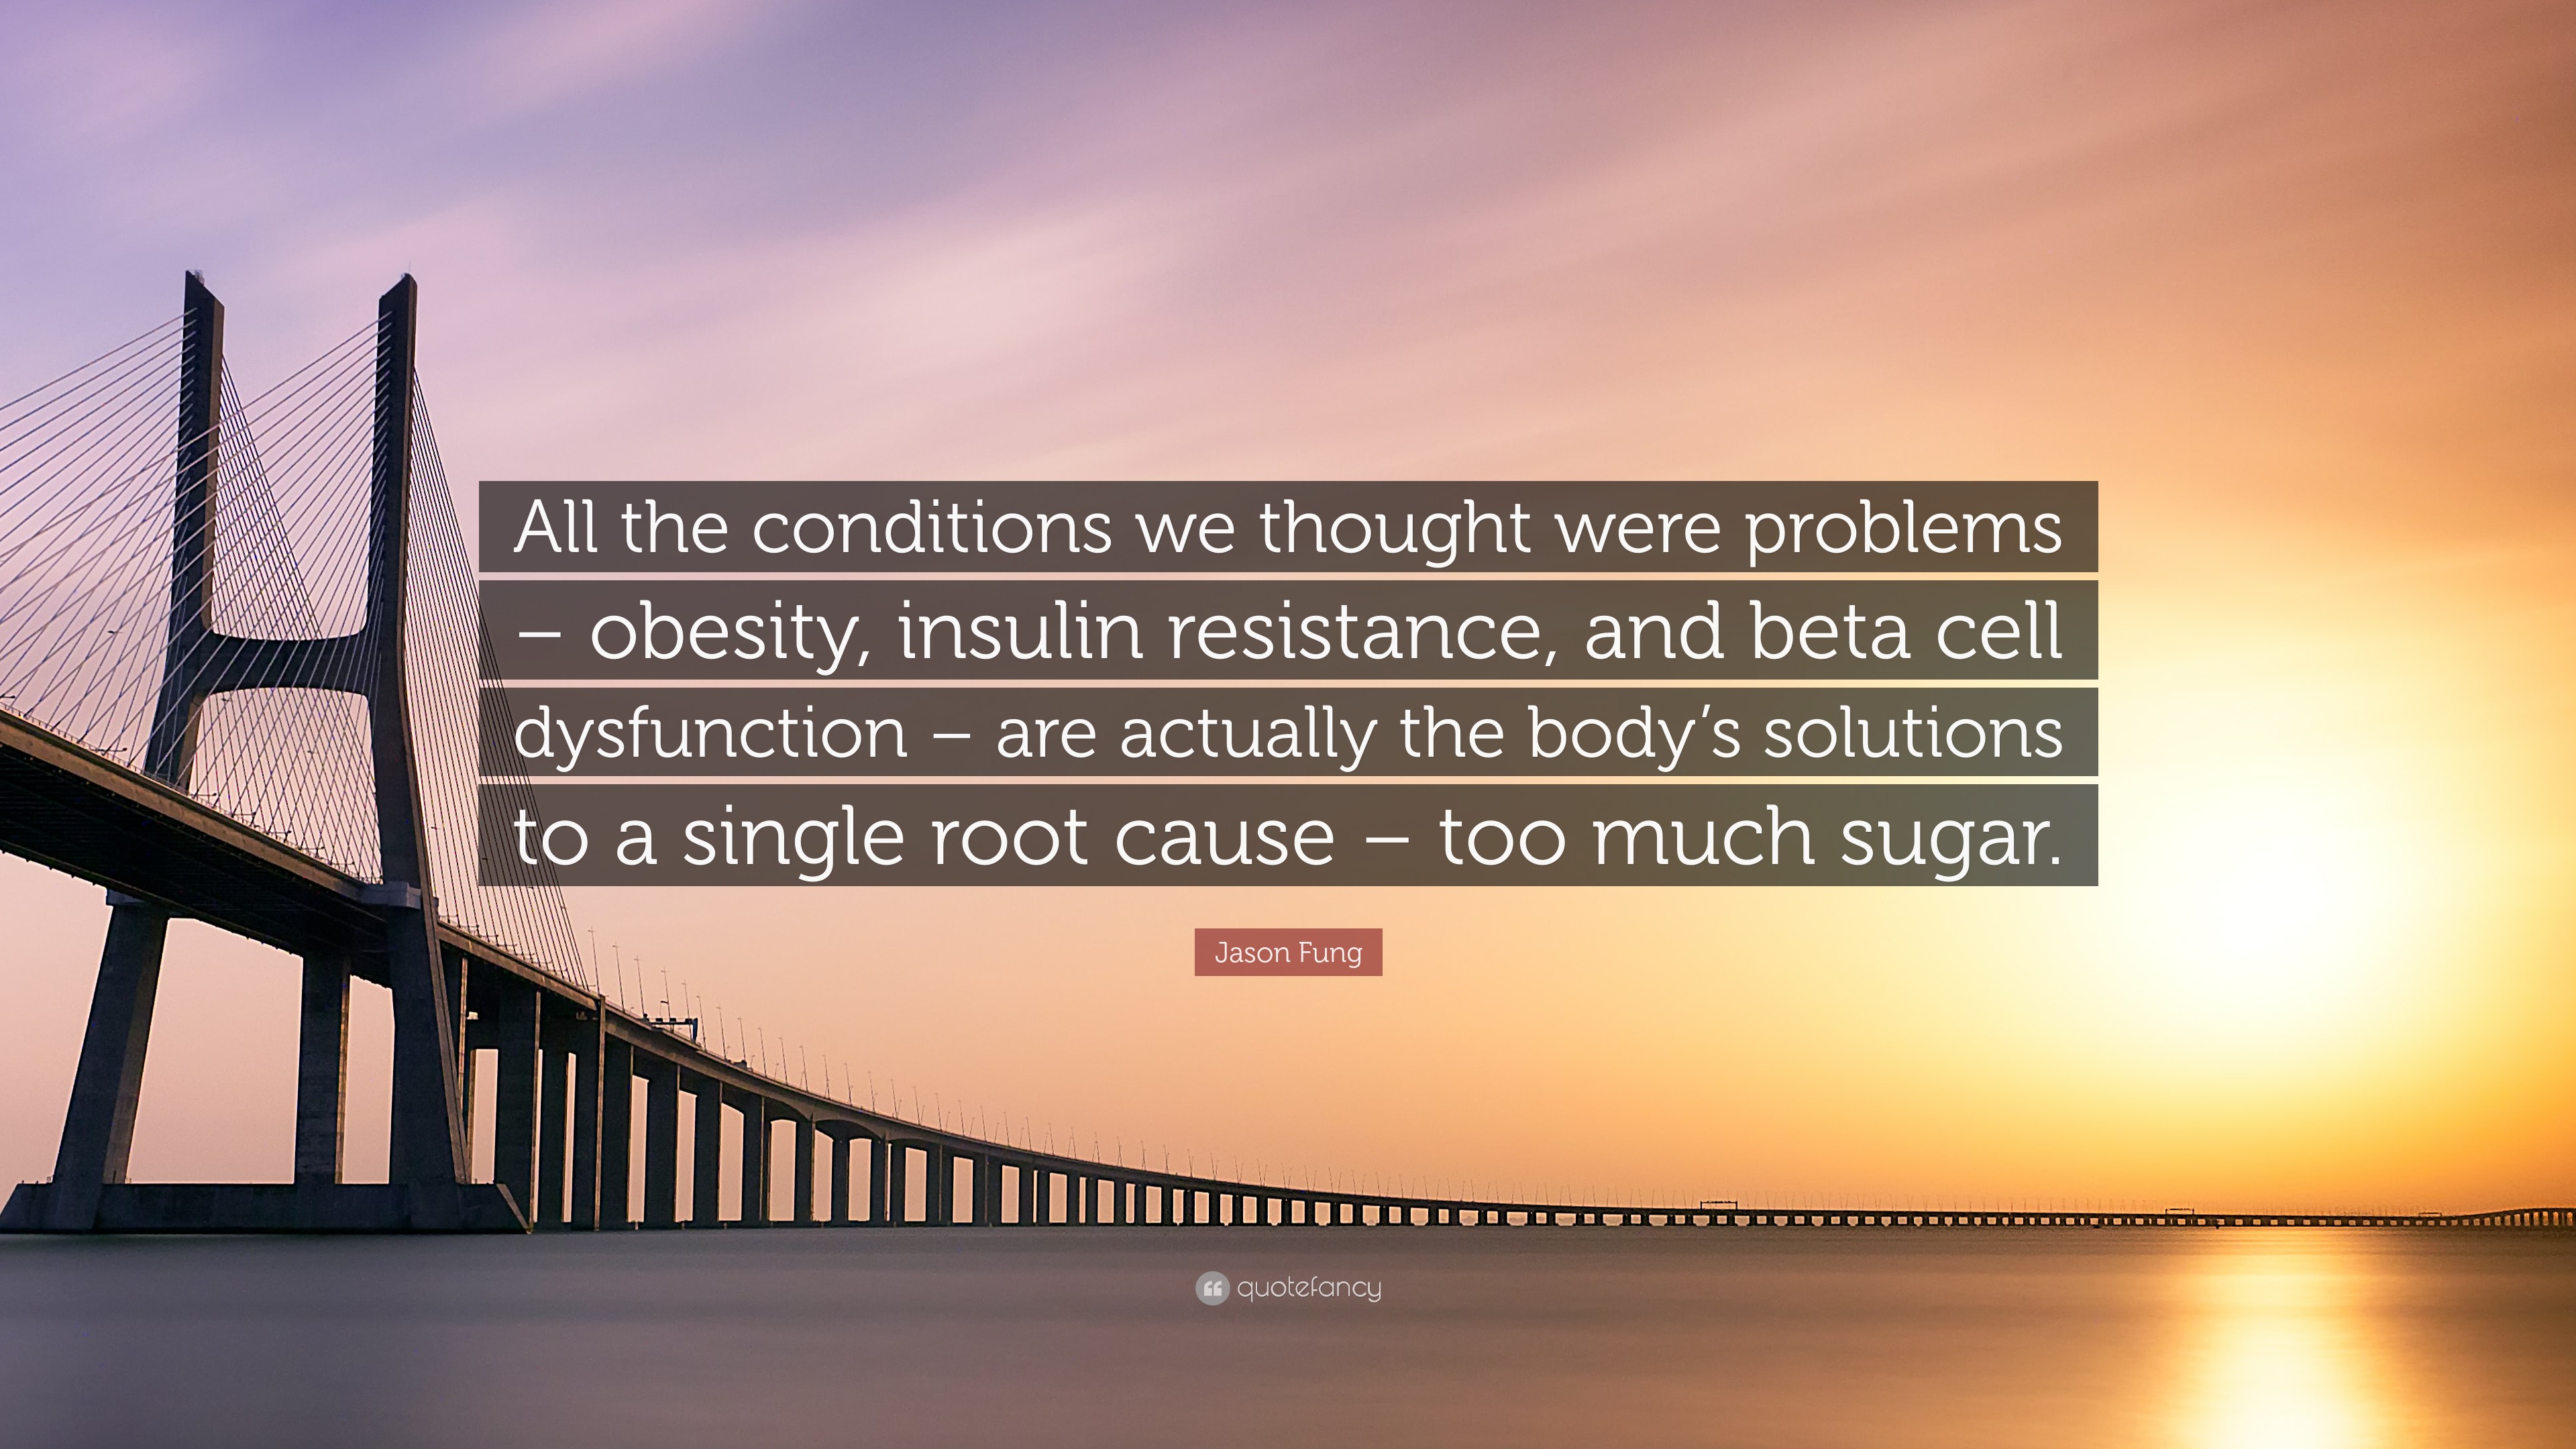 12+ BEST Dr. Jason Fung Quotes About Health And Wellbeing